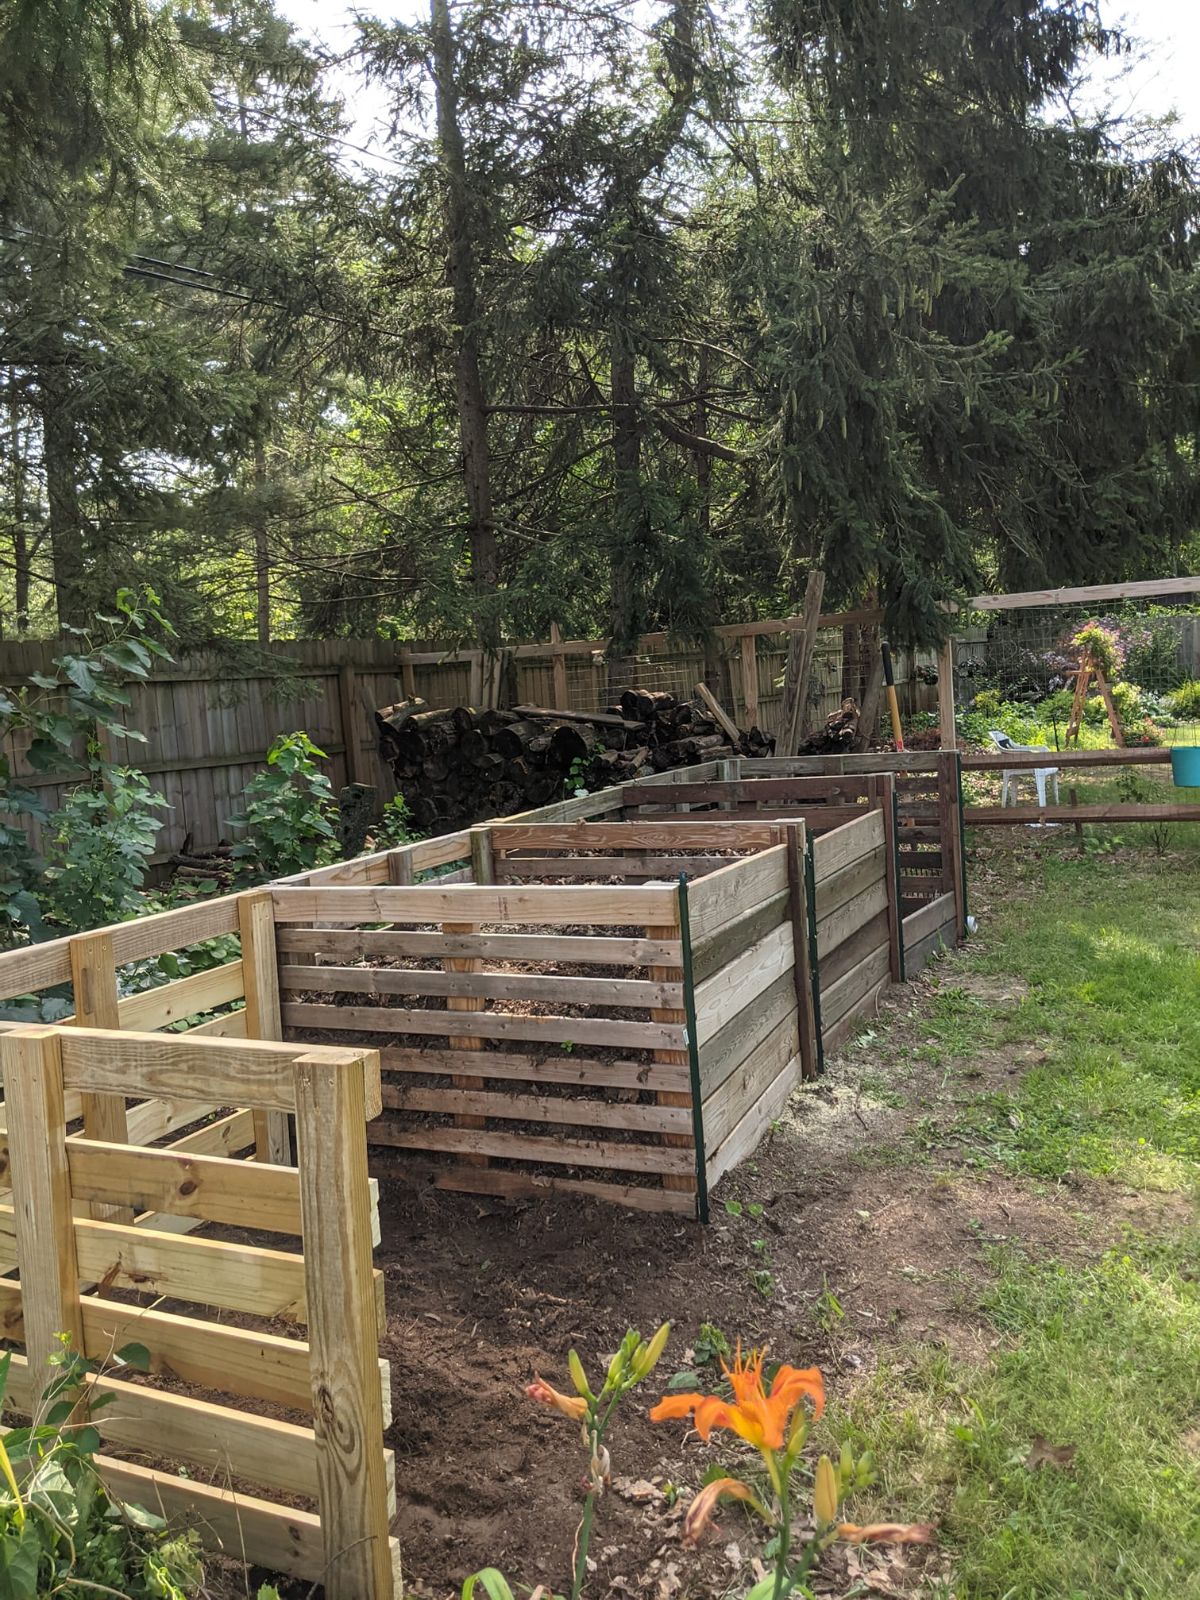 Compost bins made from wood, Photo courtesy of Cheryl Spieldenner